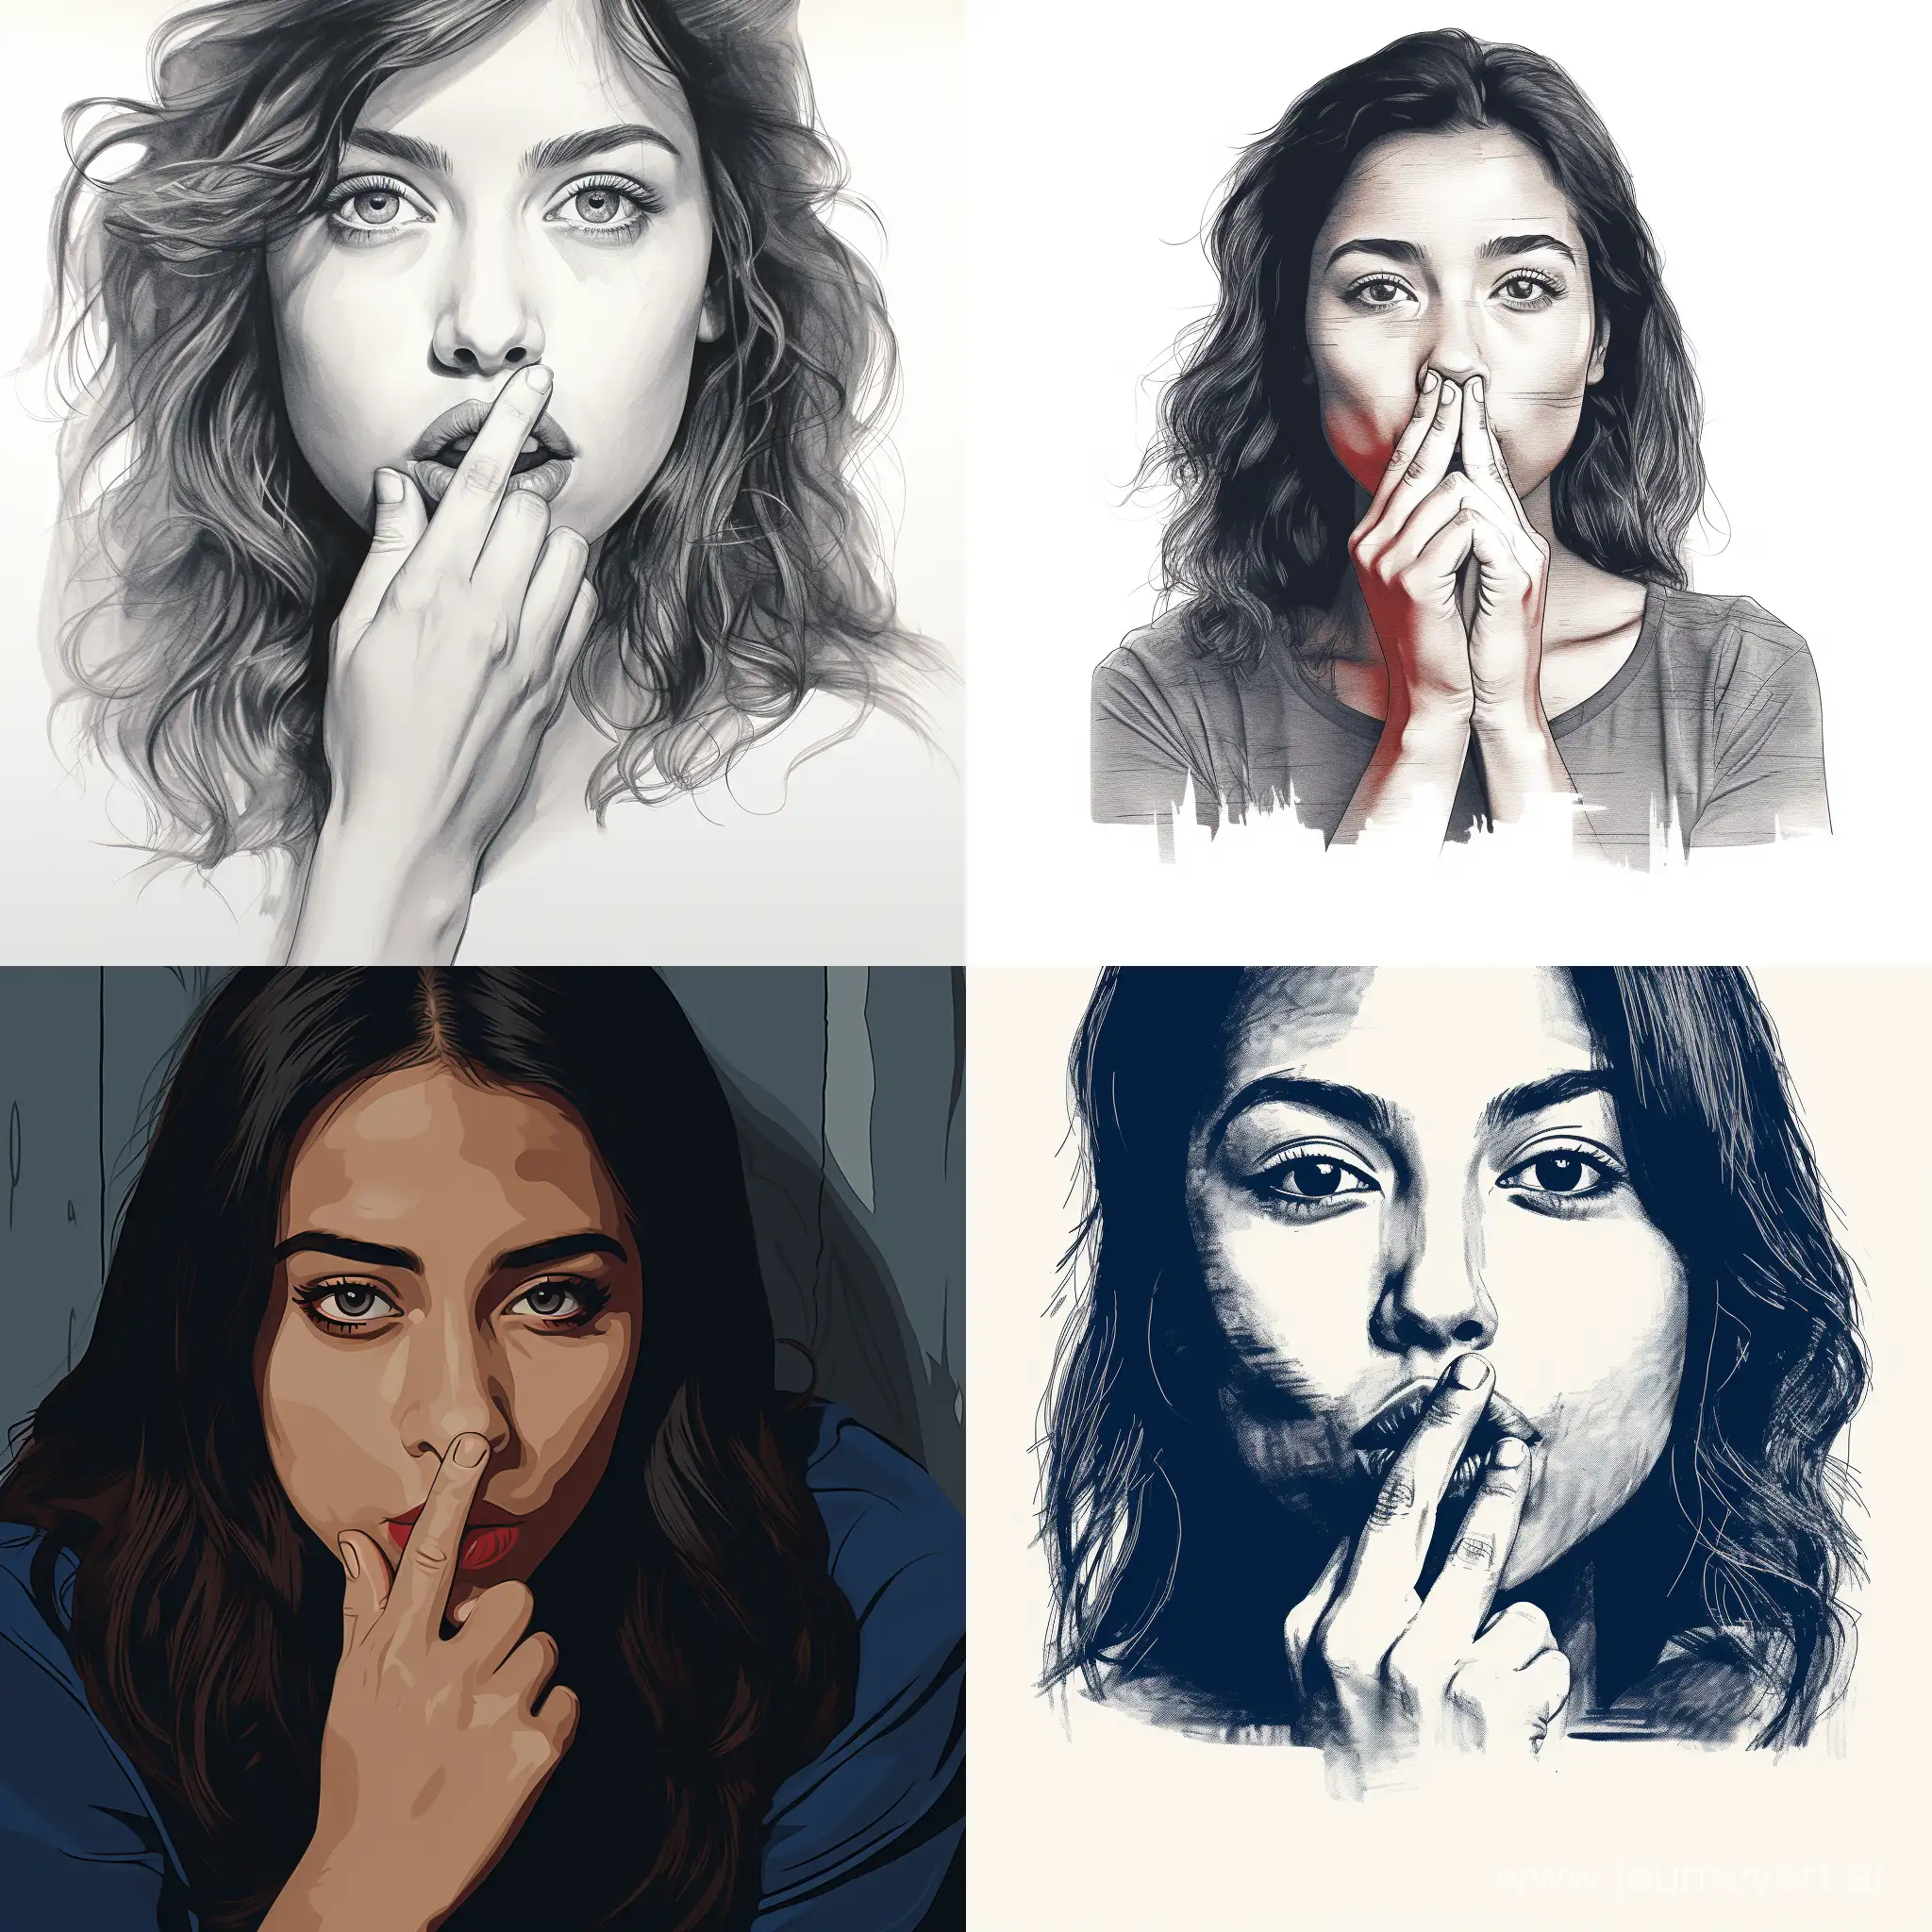 image outline of a girl with a finger at her lip, representing silence